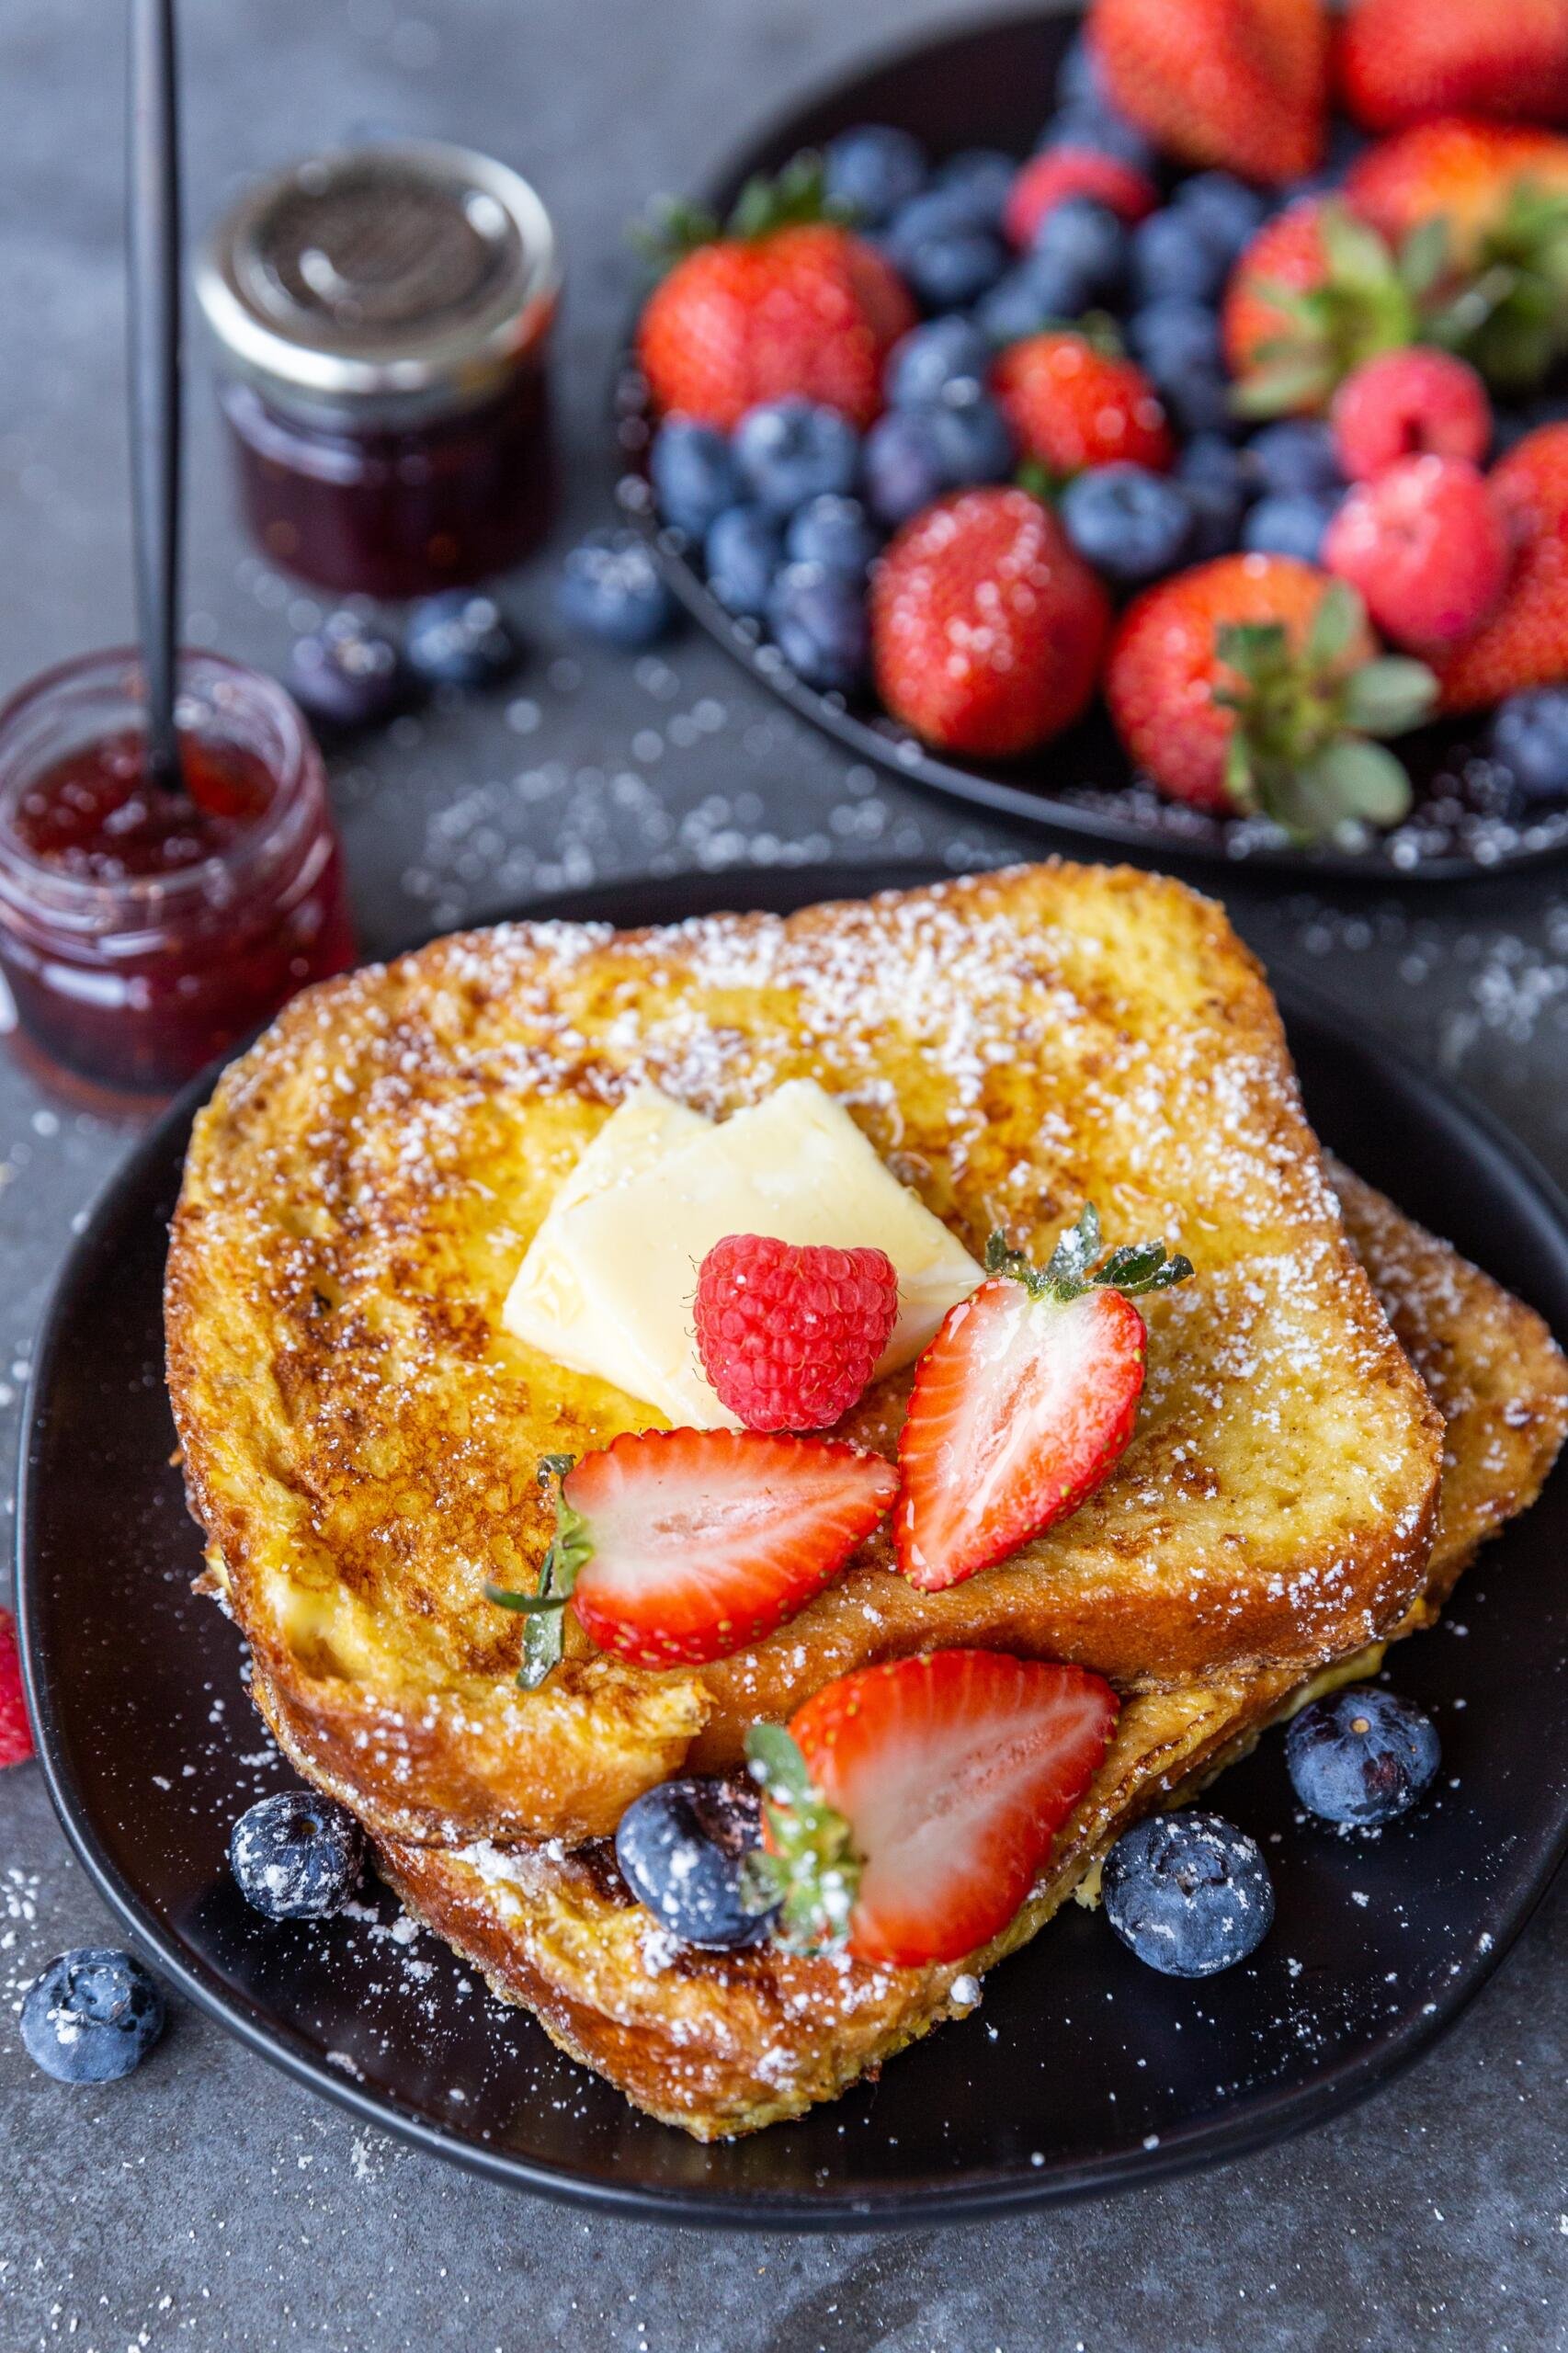 https://cdn.momsdish.com/wp-content/uploads/2021/04/Easiest-French-Toast-011-scaled.jpg